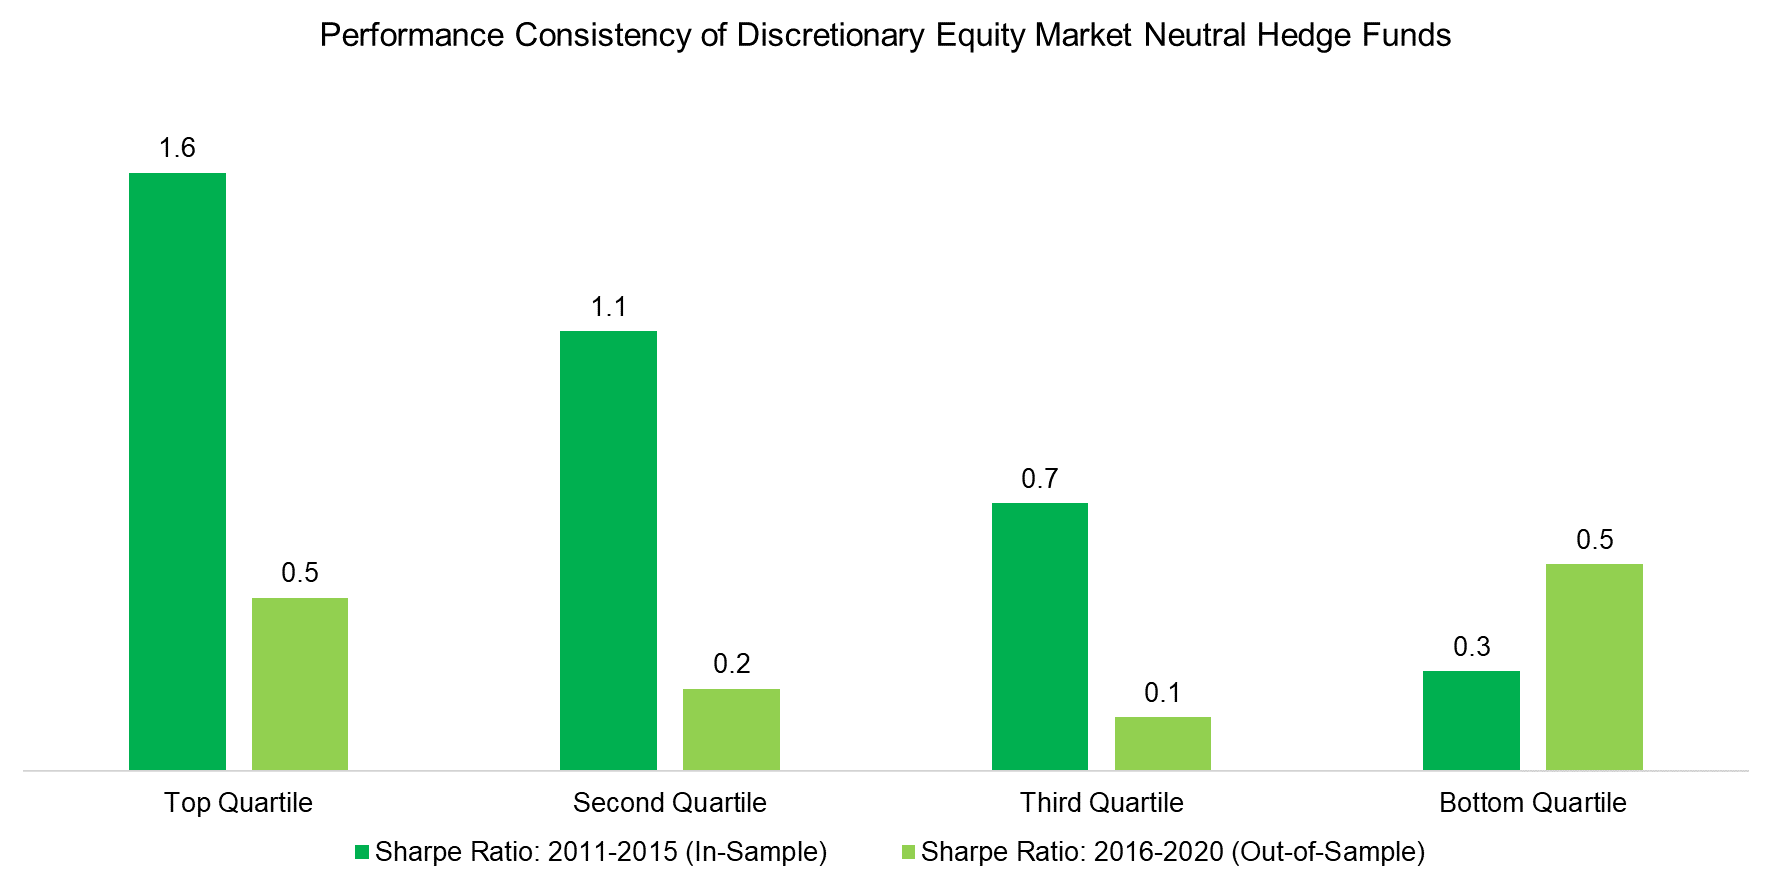 Performance Consistency of Discretionary Equity Market Neutral Hedge Funds